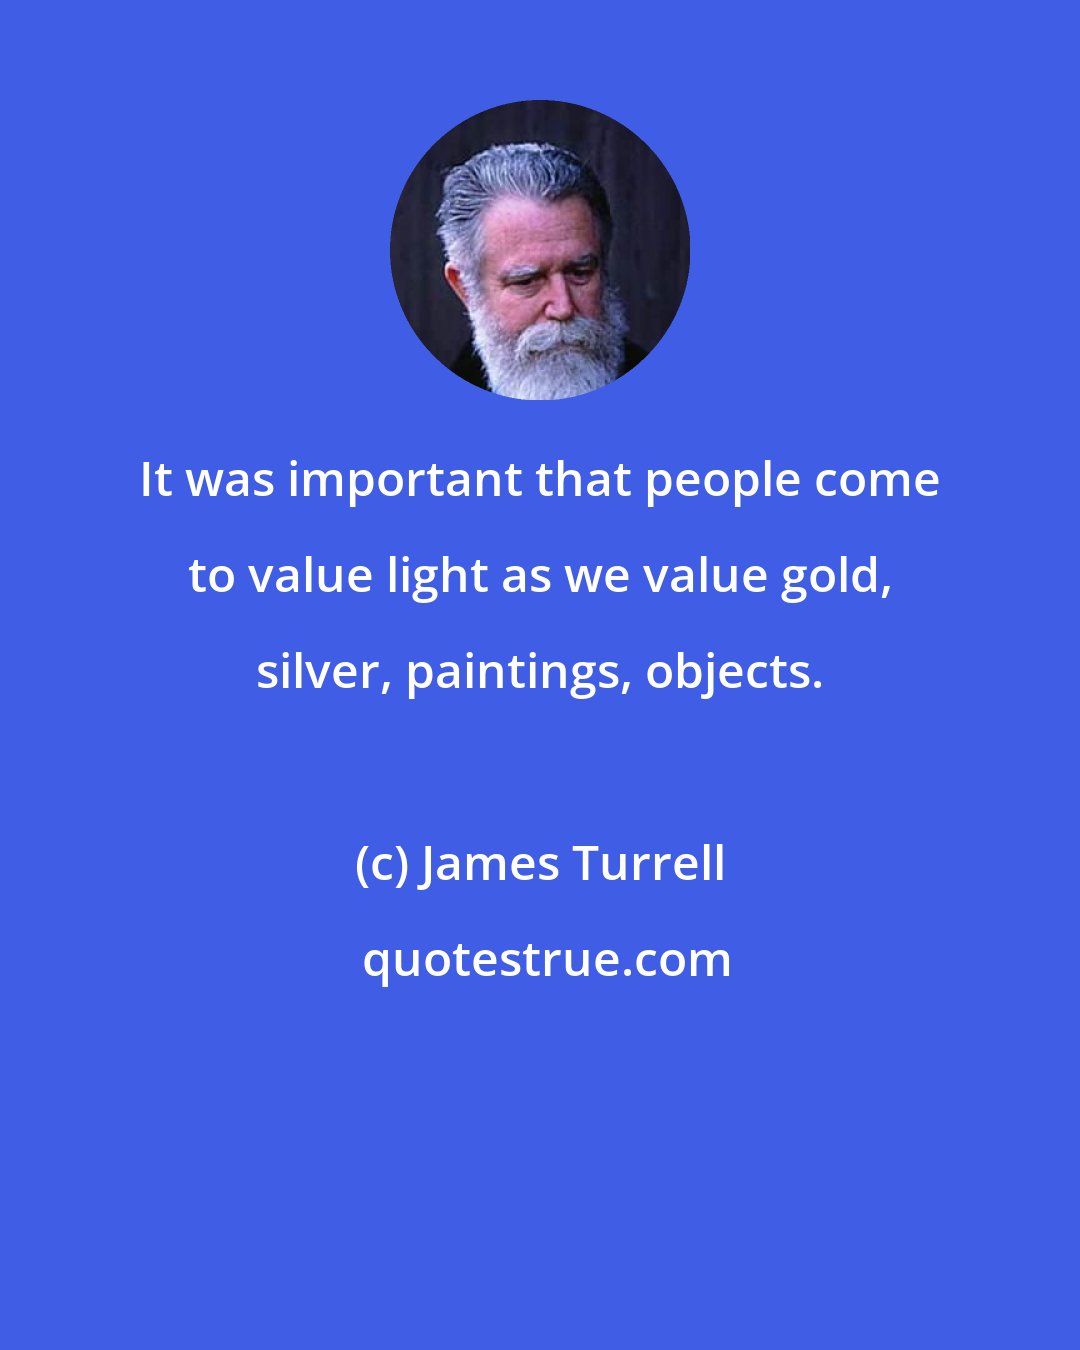 James Turrell: It was important that people come to value light as we value gold, silver, paintings, objects.